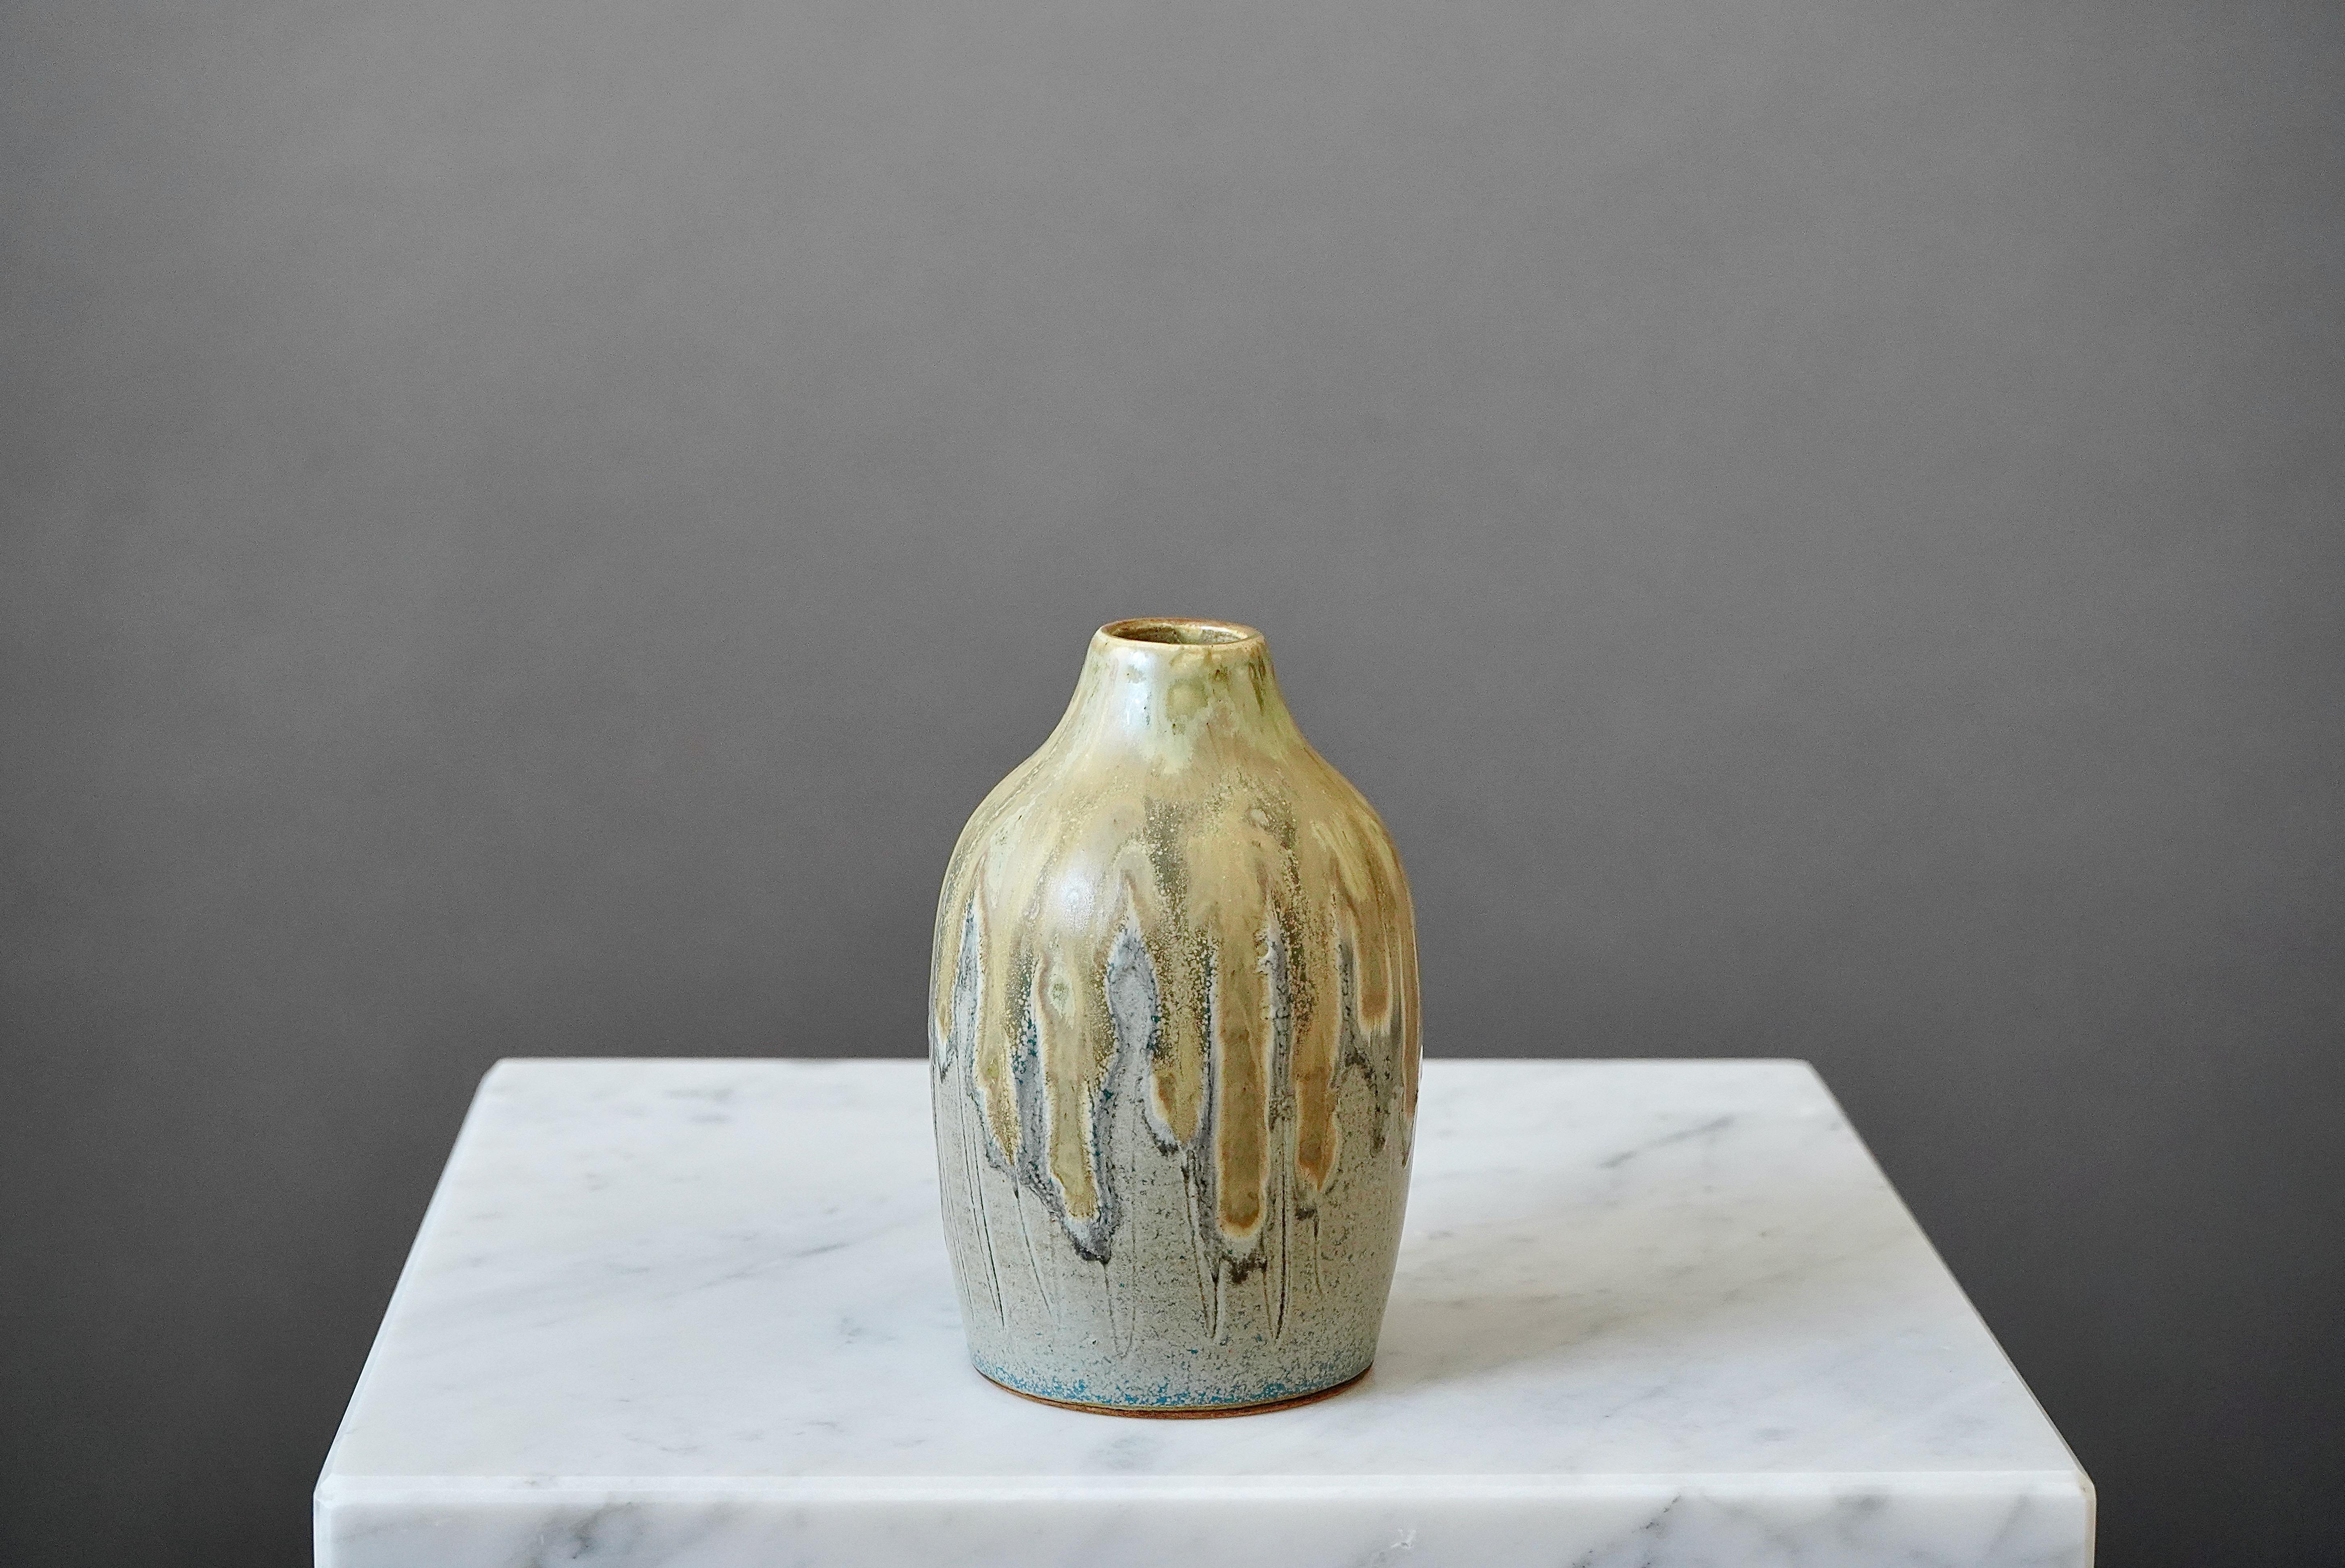 Early and unique stoneware vase with amazing glaze. 
Made by Yngve Blixt, in his studio in Höganäs, Sweden, 1957.

Excellent condition. Incised Yngve Blixt, Höganäs, 1957.

Yngve Blixt (1920–1981) was one of Sweden’s leading ceramic artists in